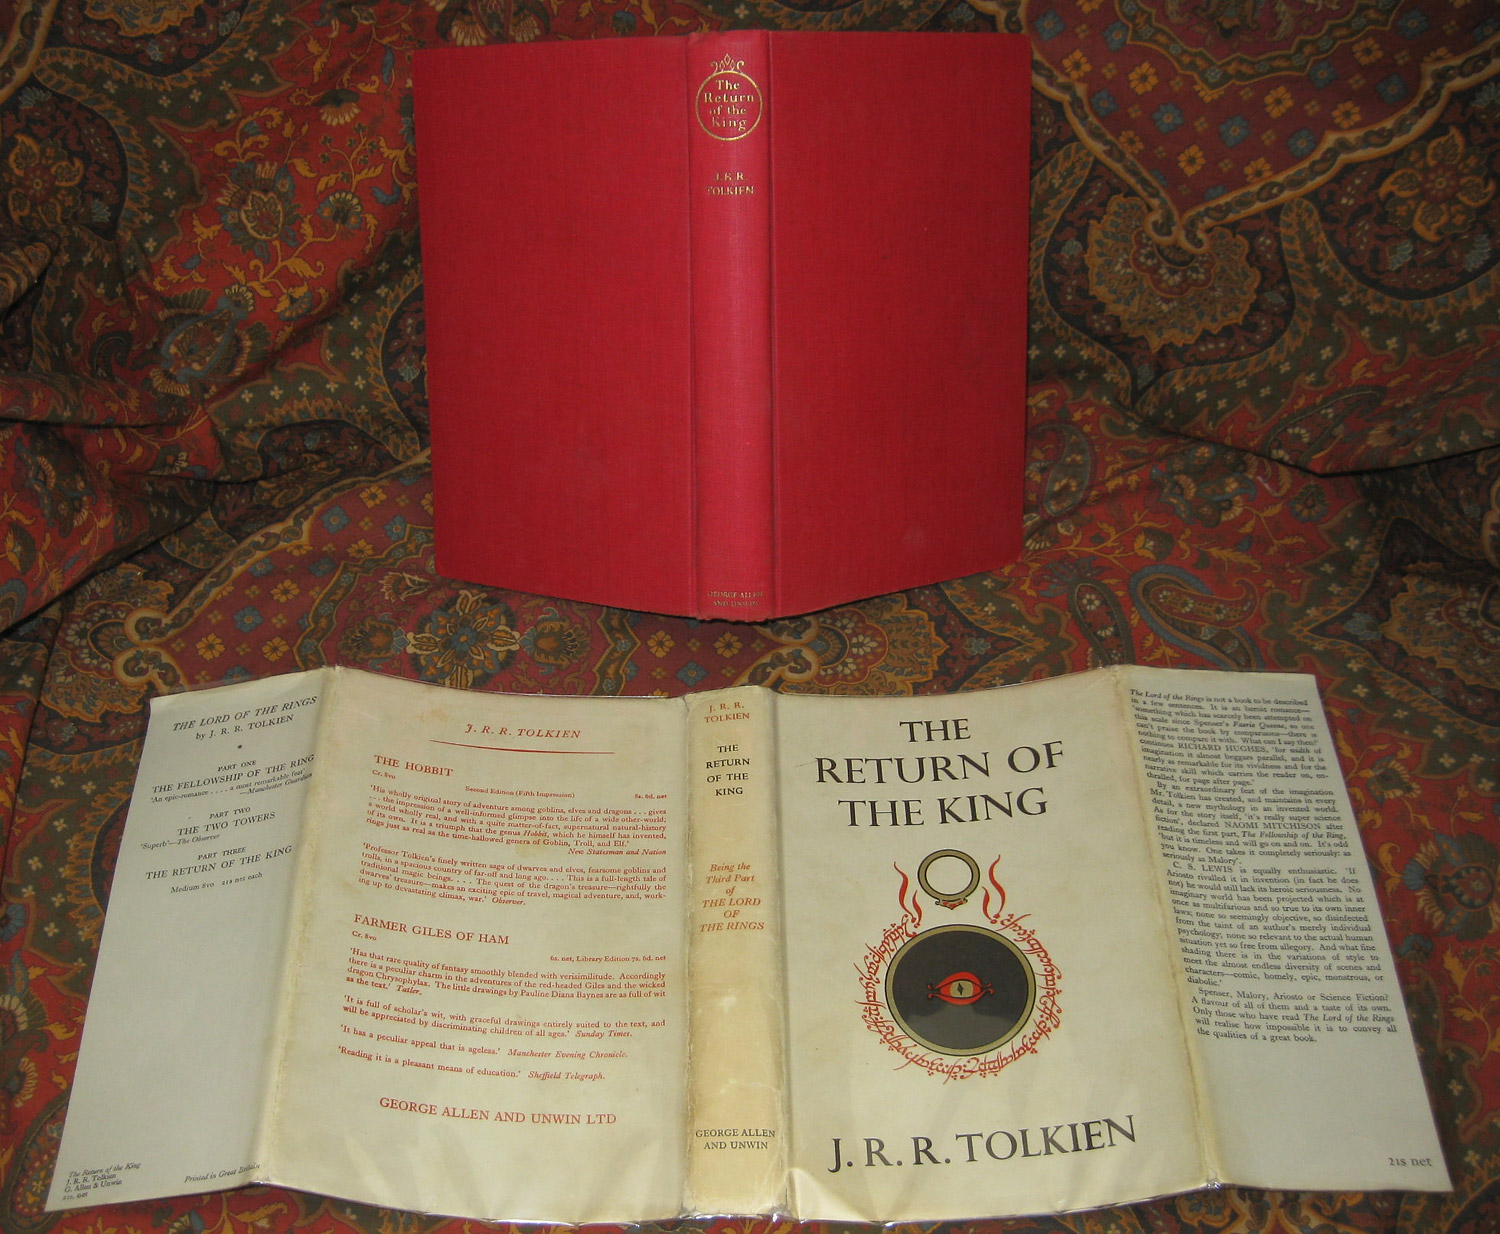 The Lord of the Rings | Première édition anglaise chez Georges Allen and Unwin